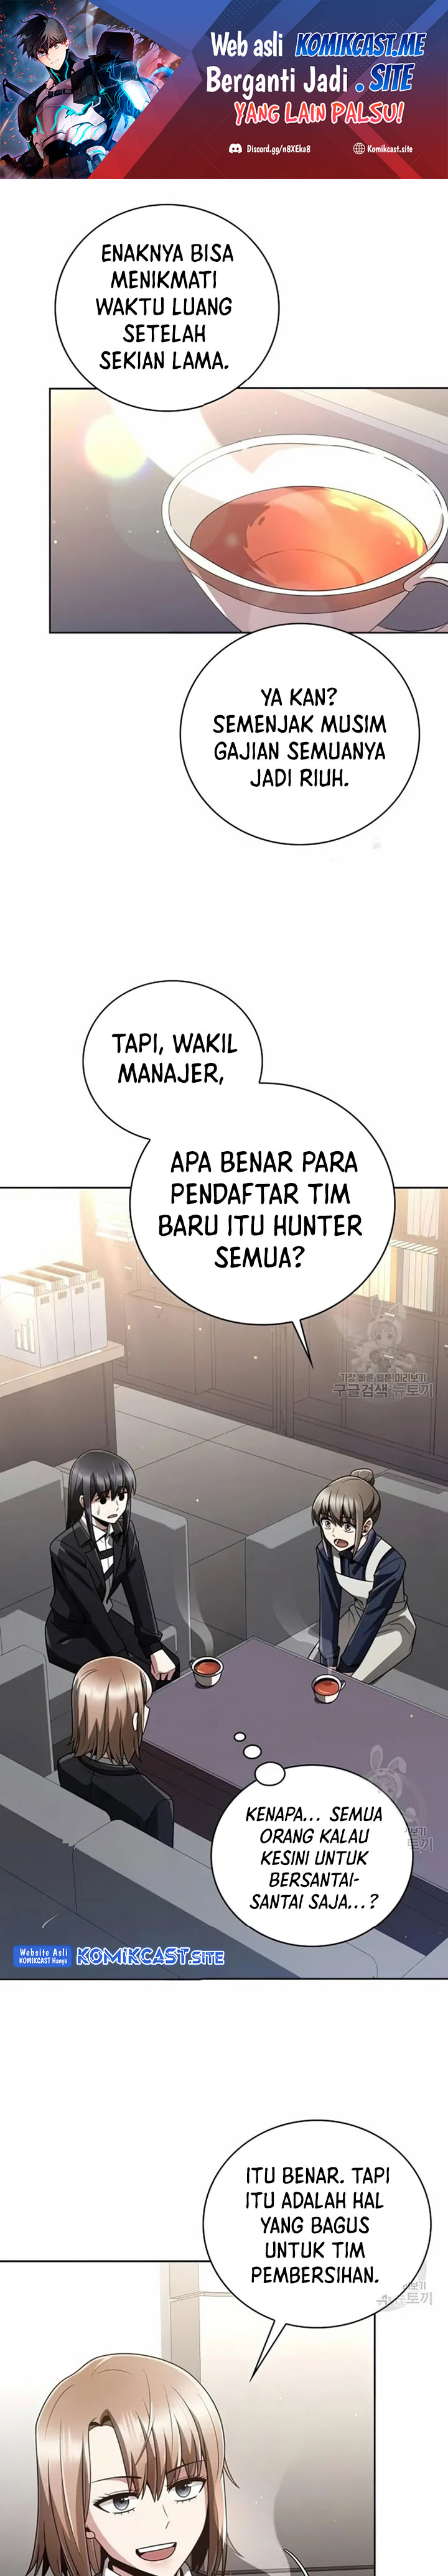 Dilarang COPAS - situs resmi www.mangacanblog.com - Komik clever cleaning life of the returned genius hunter 029 - chapter 29 30 Indonesia clever cleaning life of the returned genius hunter 029 - chapter 29 Terbaru 1|Baca Manga Komik Indonesia|Mangacan